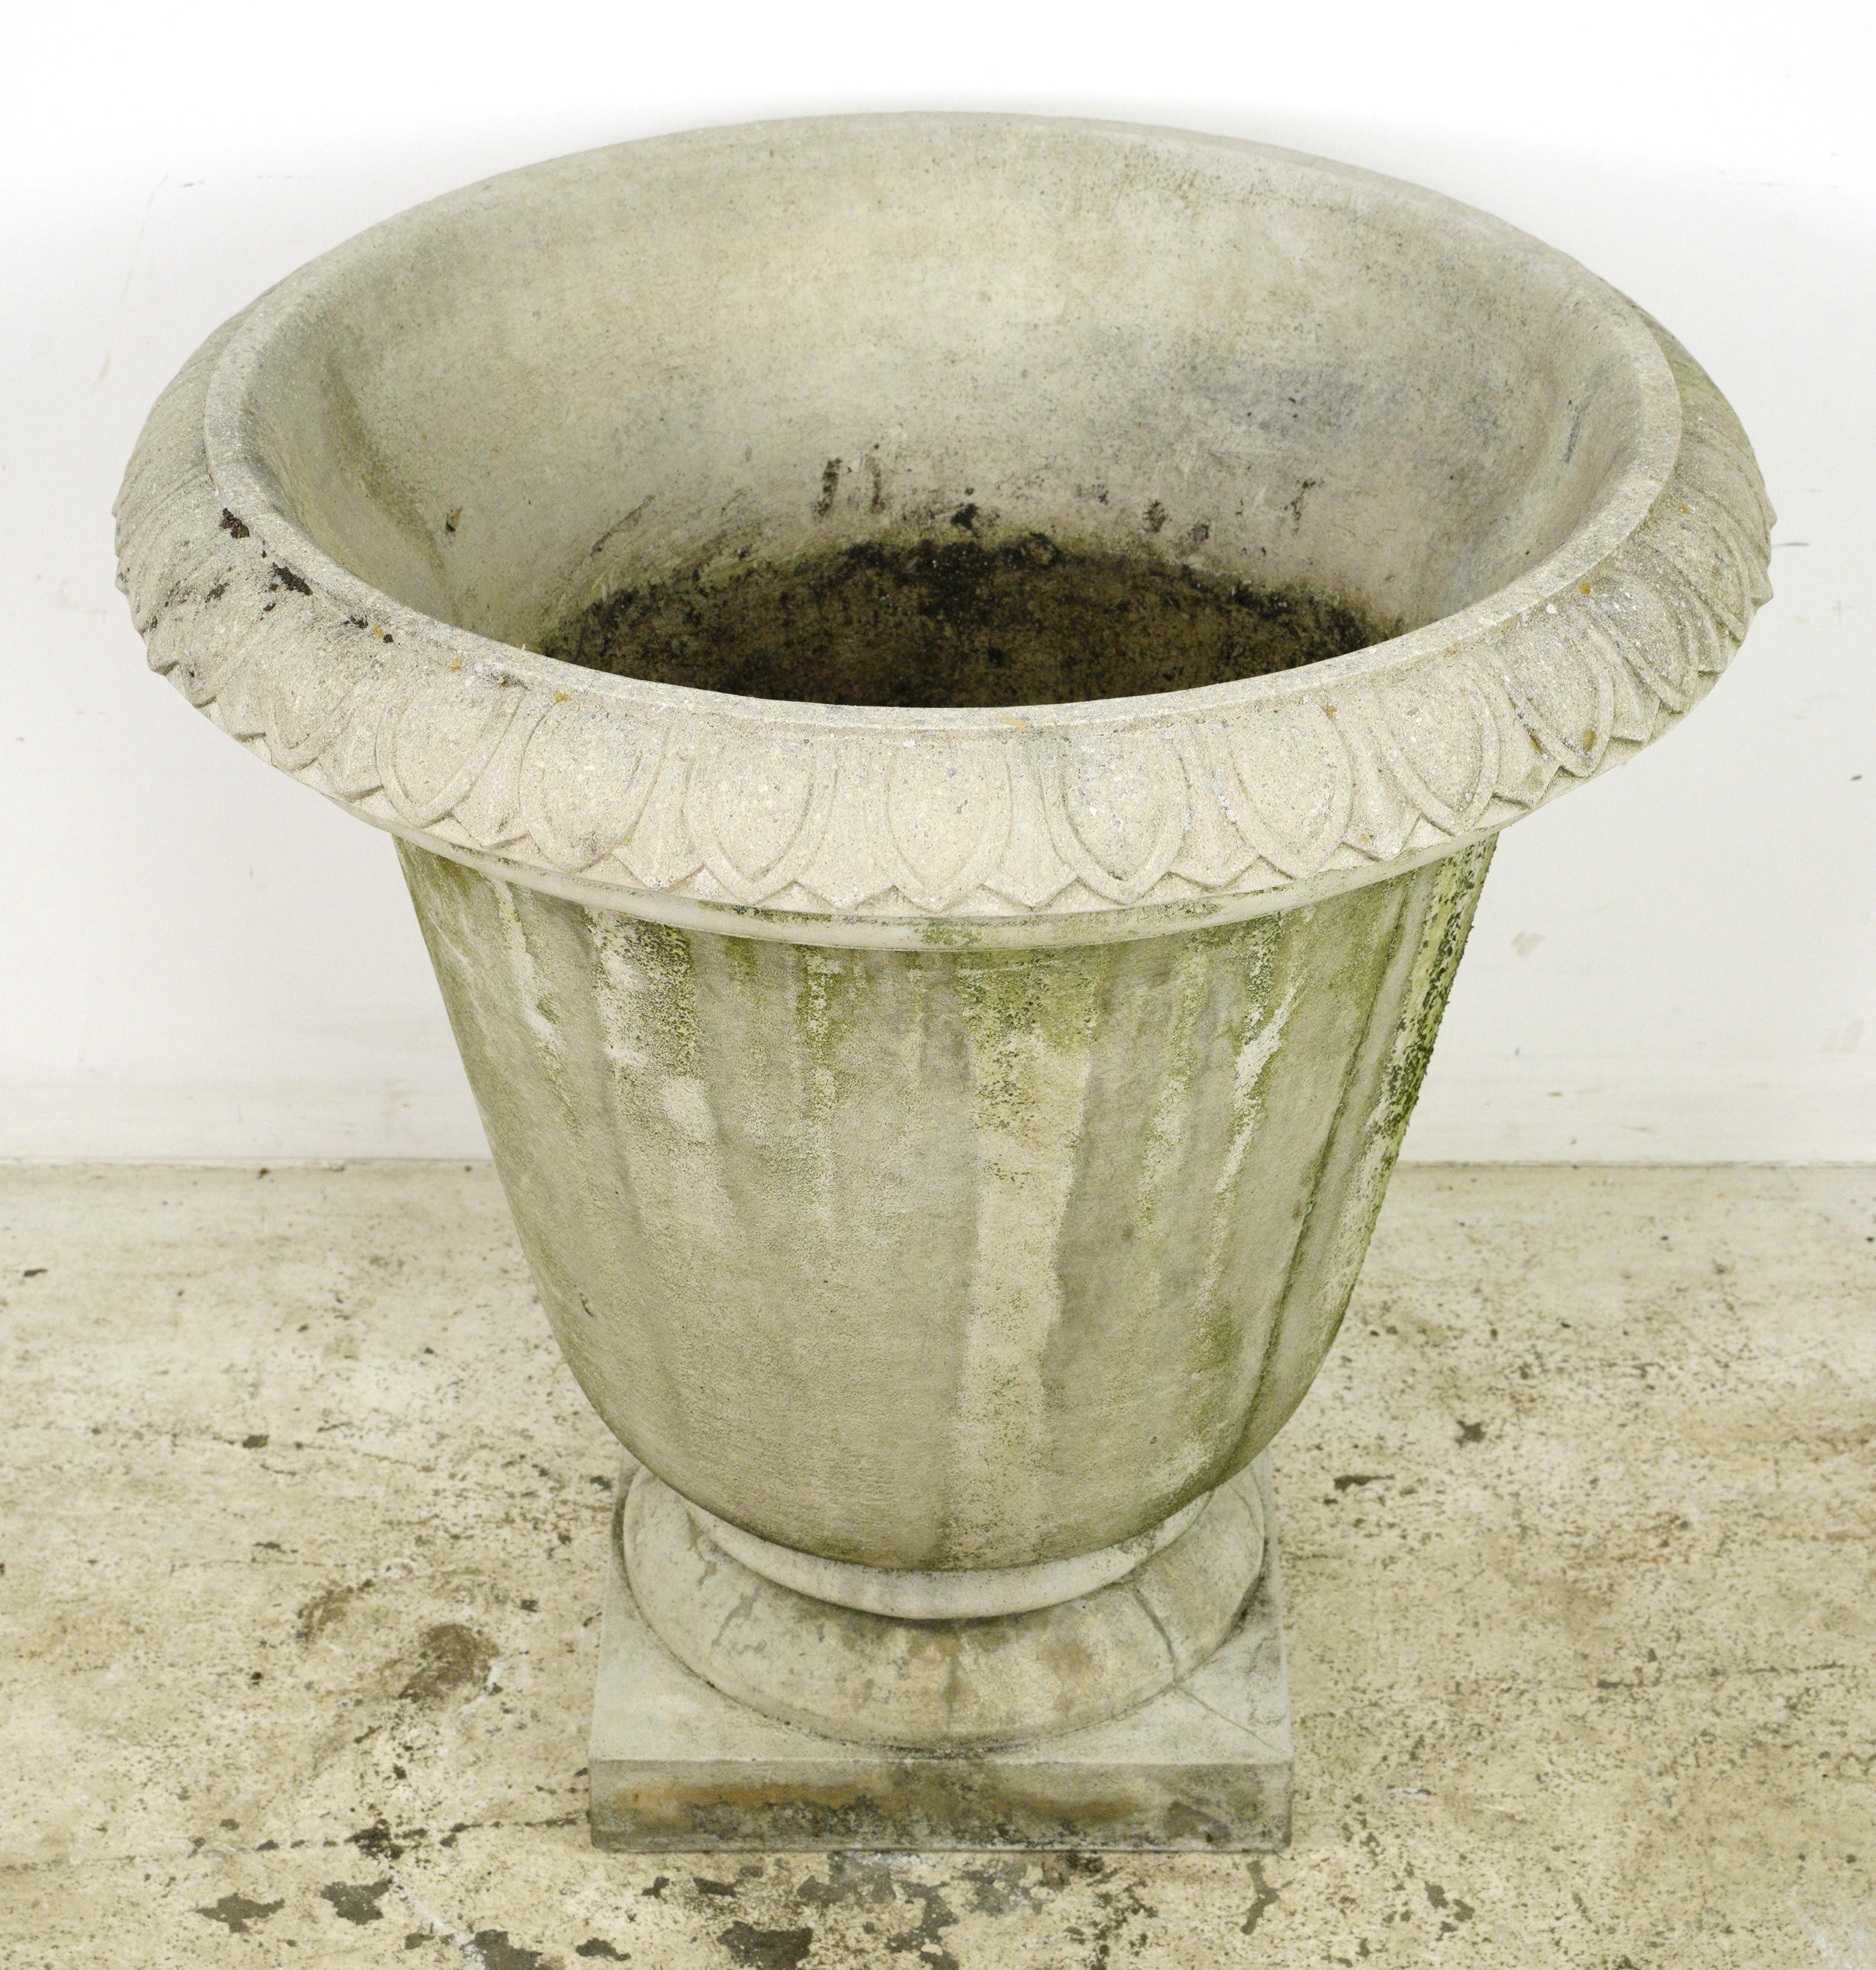 This urn shaped planter boasts a timeless design featuring egg & dart trim detailing. Crafted from durable concrete, it provides a sturdy and reliable container for your plants. Whether used as a standalone decorative piece or filled with vibrant